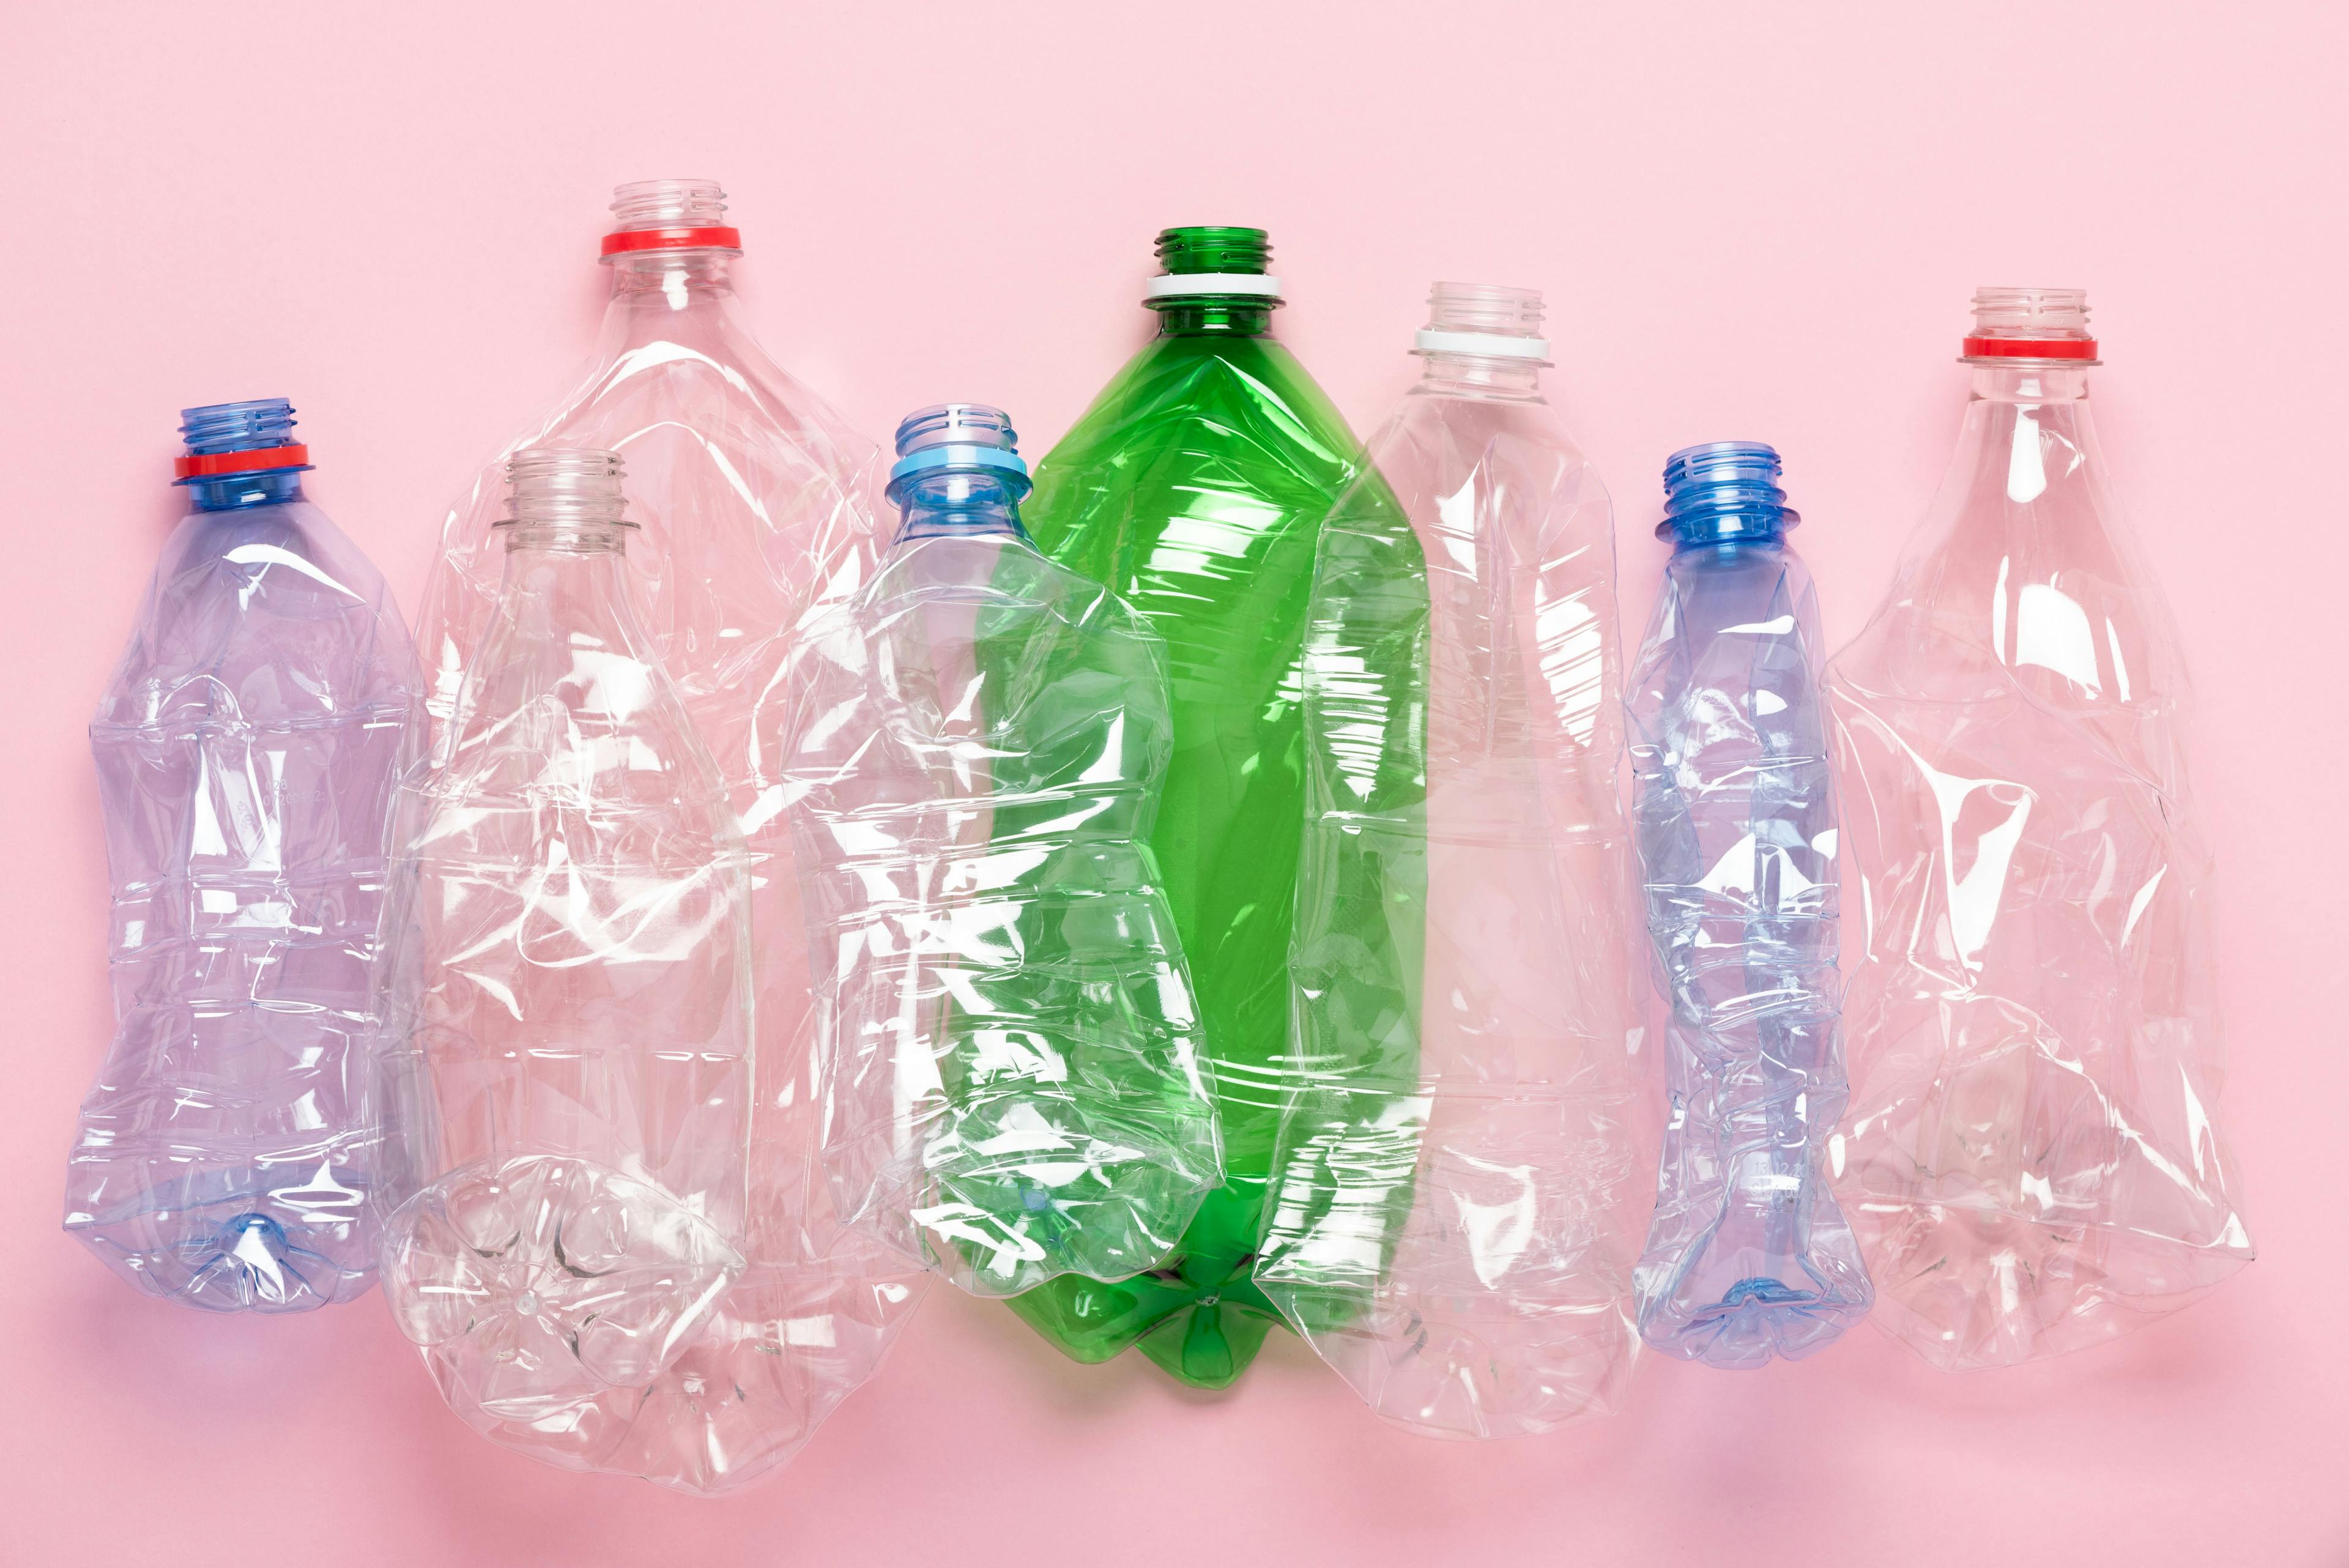 Plastic bottles on pink pastel background top view. Eco plastic recycling concept. | Image Credit: © nevodka.com - stock.adobe.com